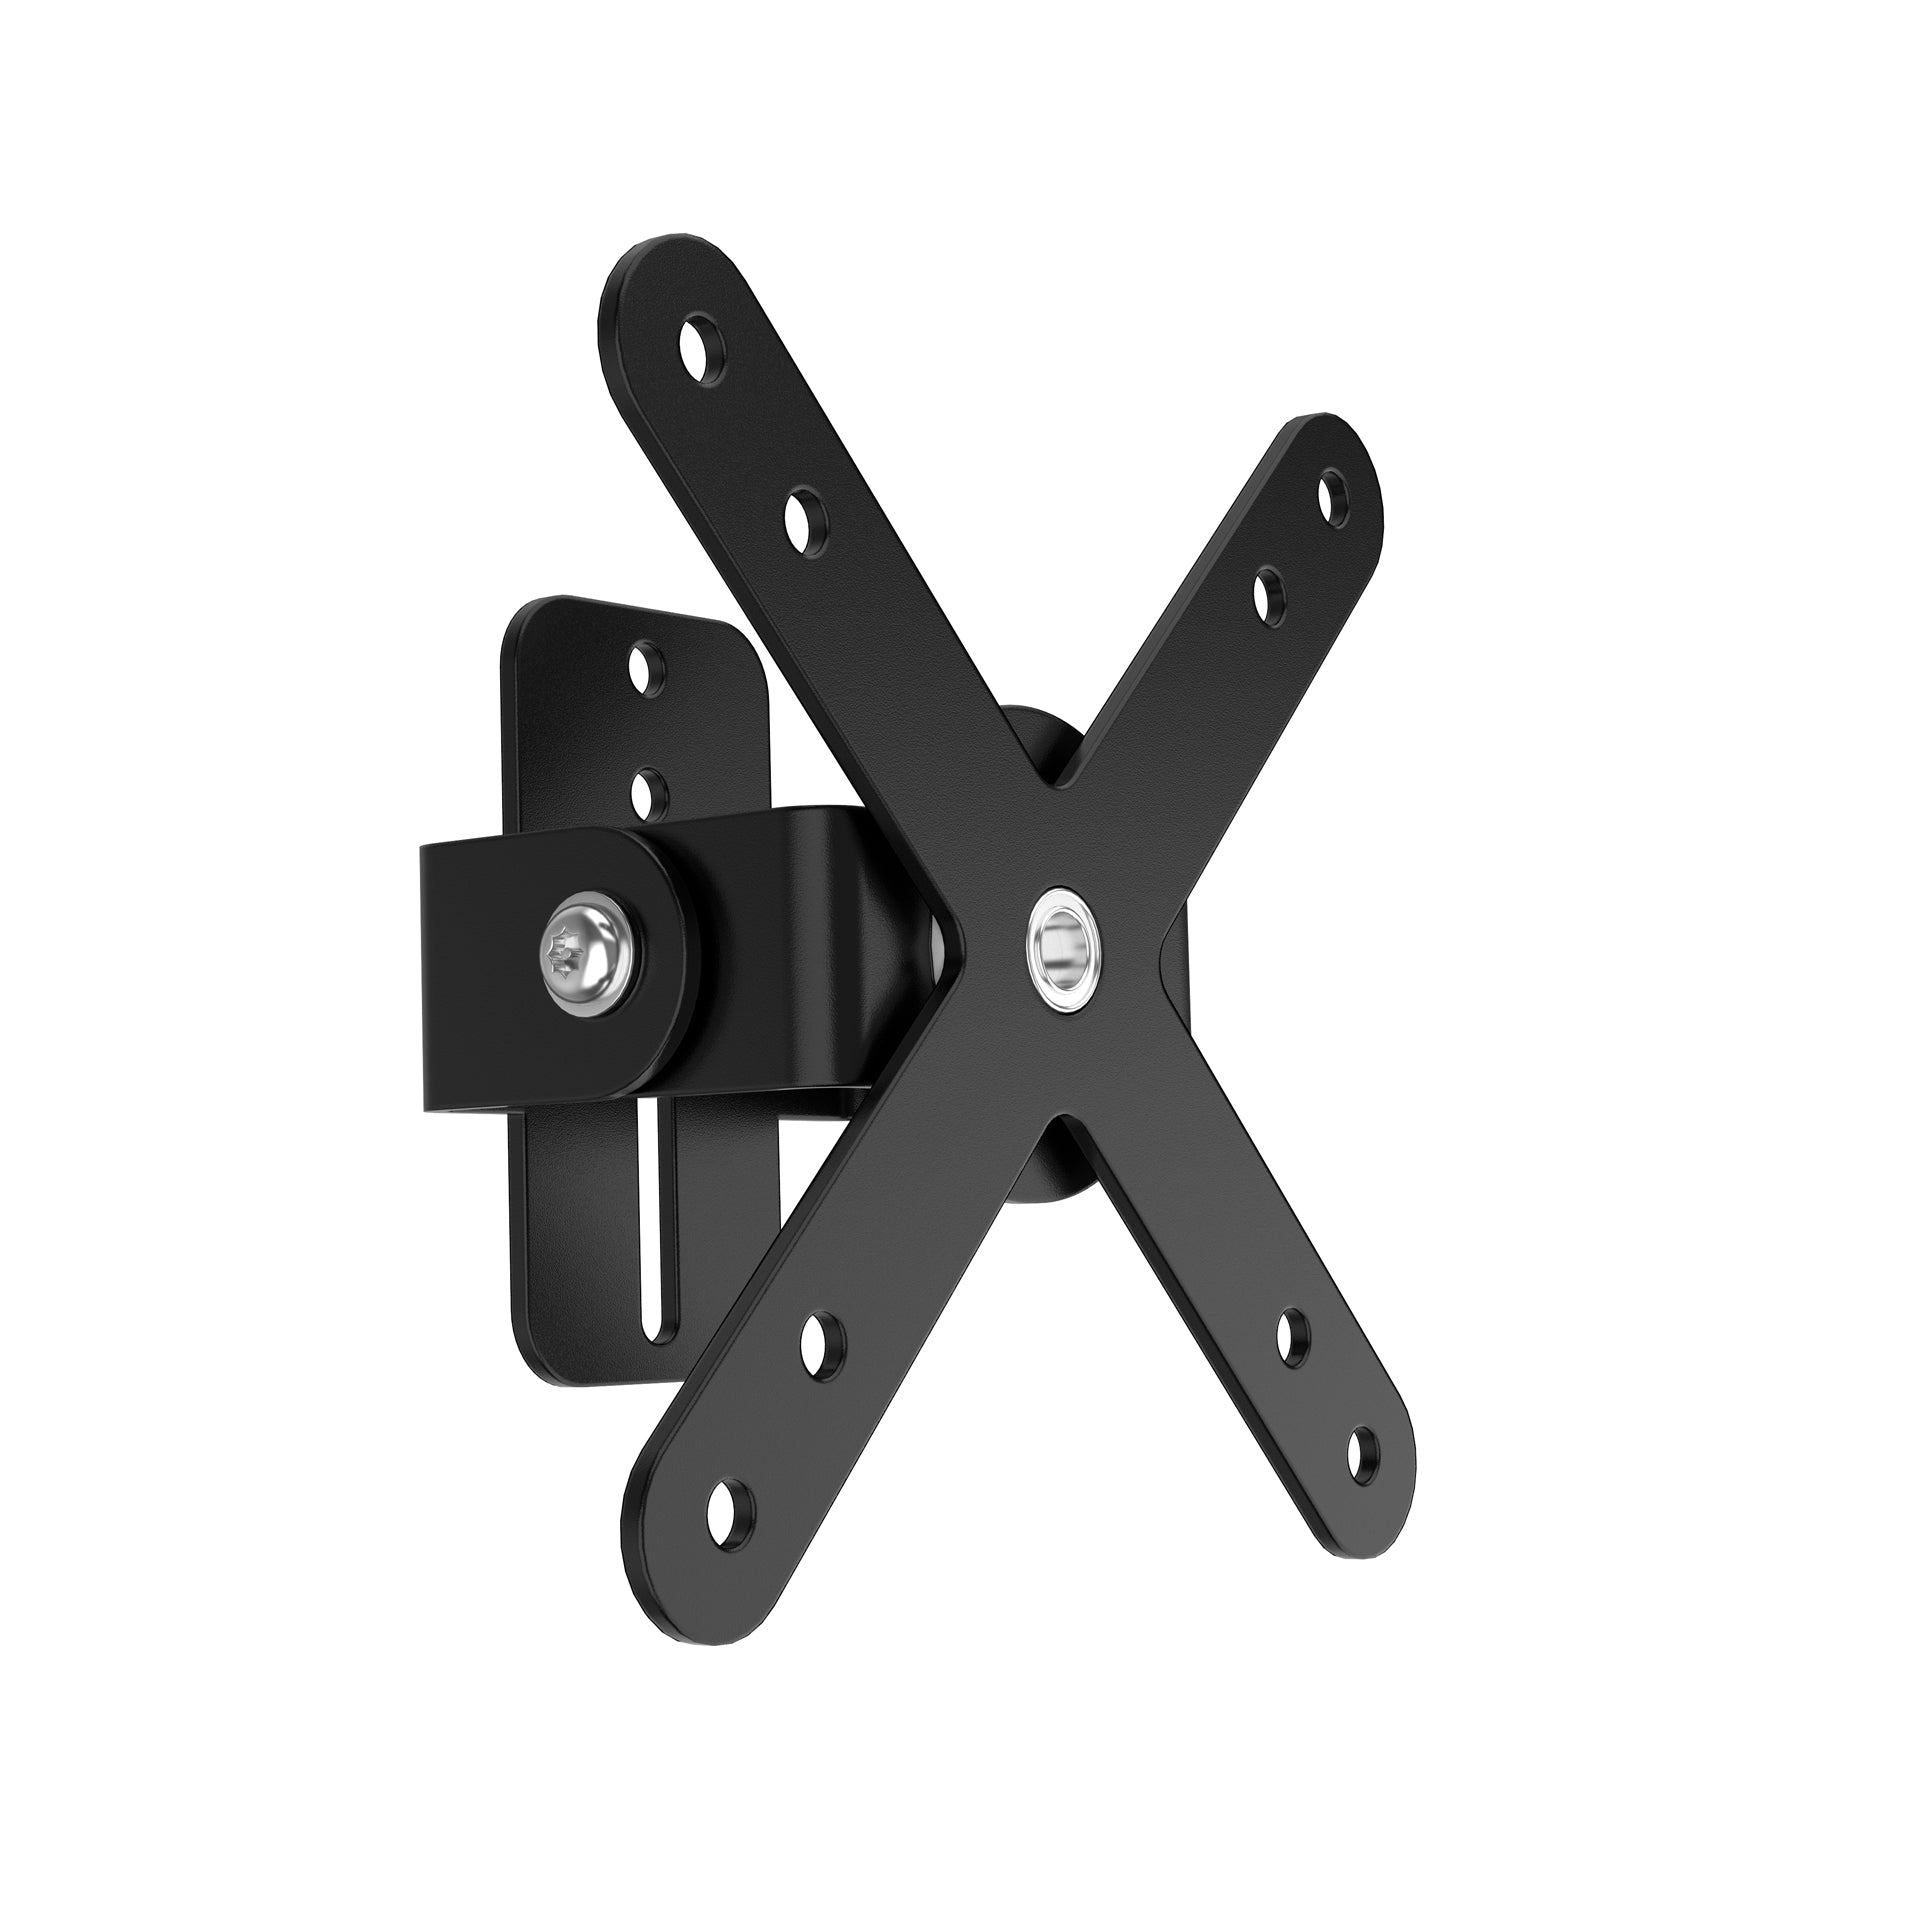 Articulating VESA Plate for Poles, Beams, and Corners